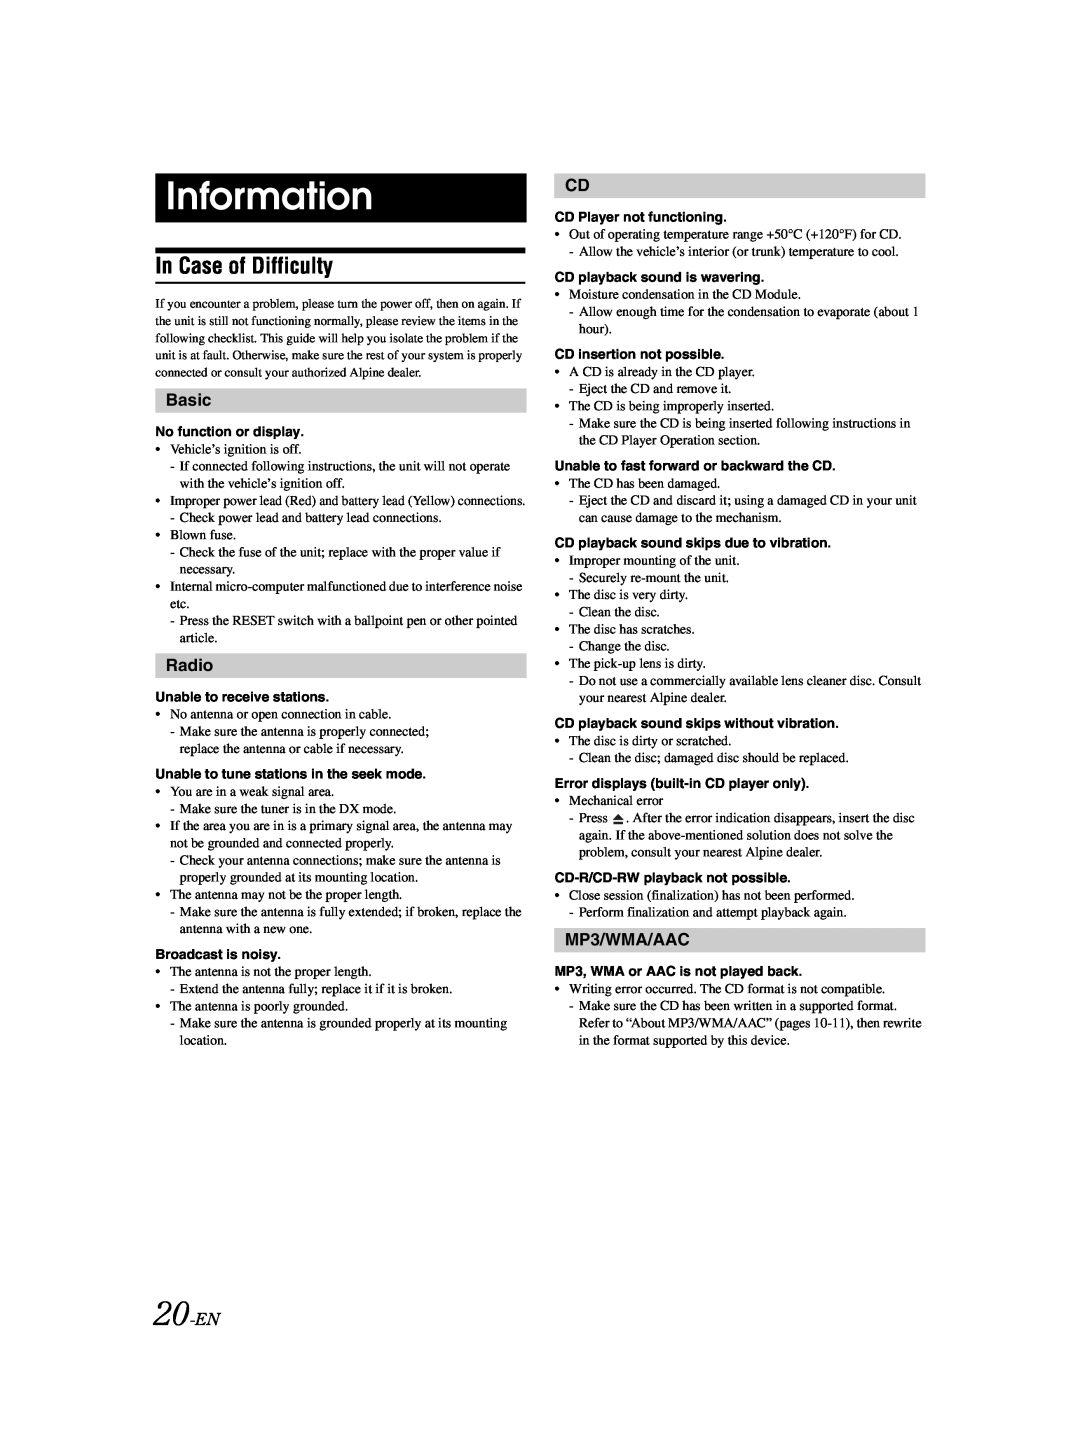 Alpine CDE-9873 owner manual Information, In Case of Difficulty, Basic, Radio, 20-EN, MP3/WMA/AAC 